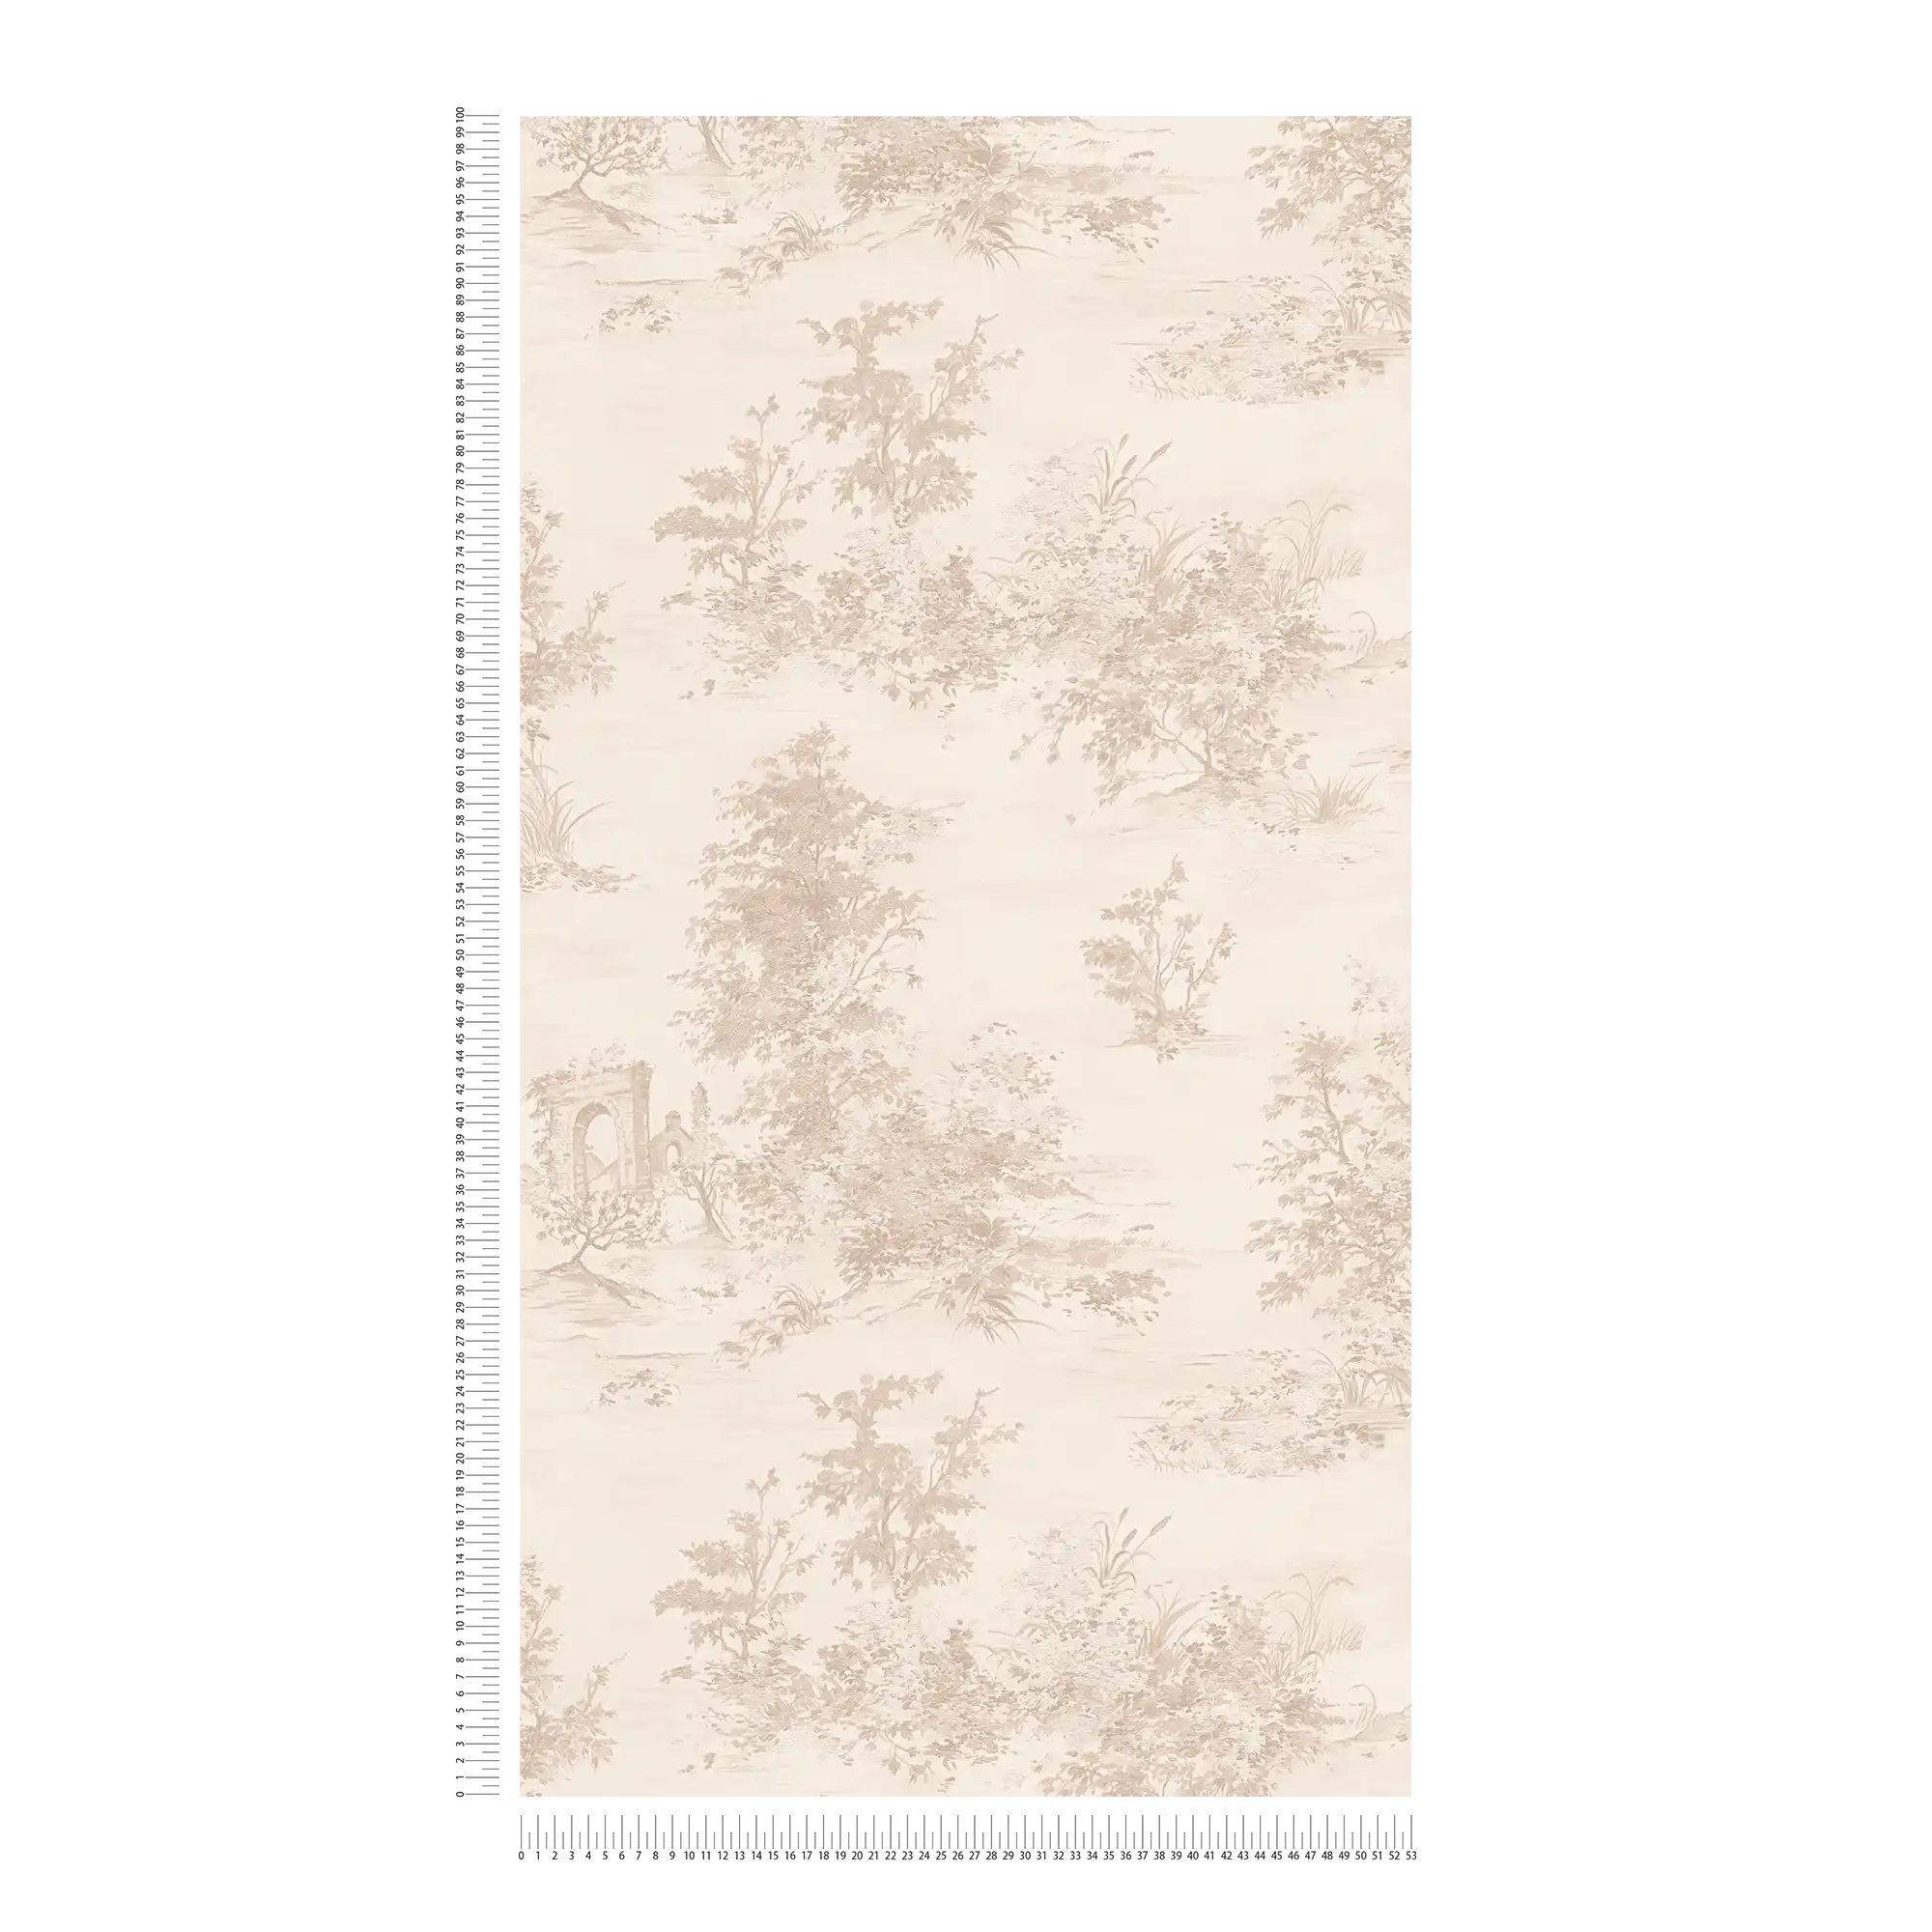             Country house wallpaper in historical style with landscape motif - beige, cream, pink
        